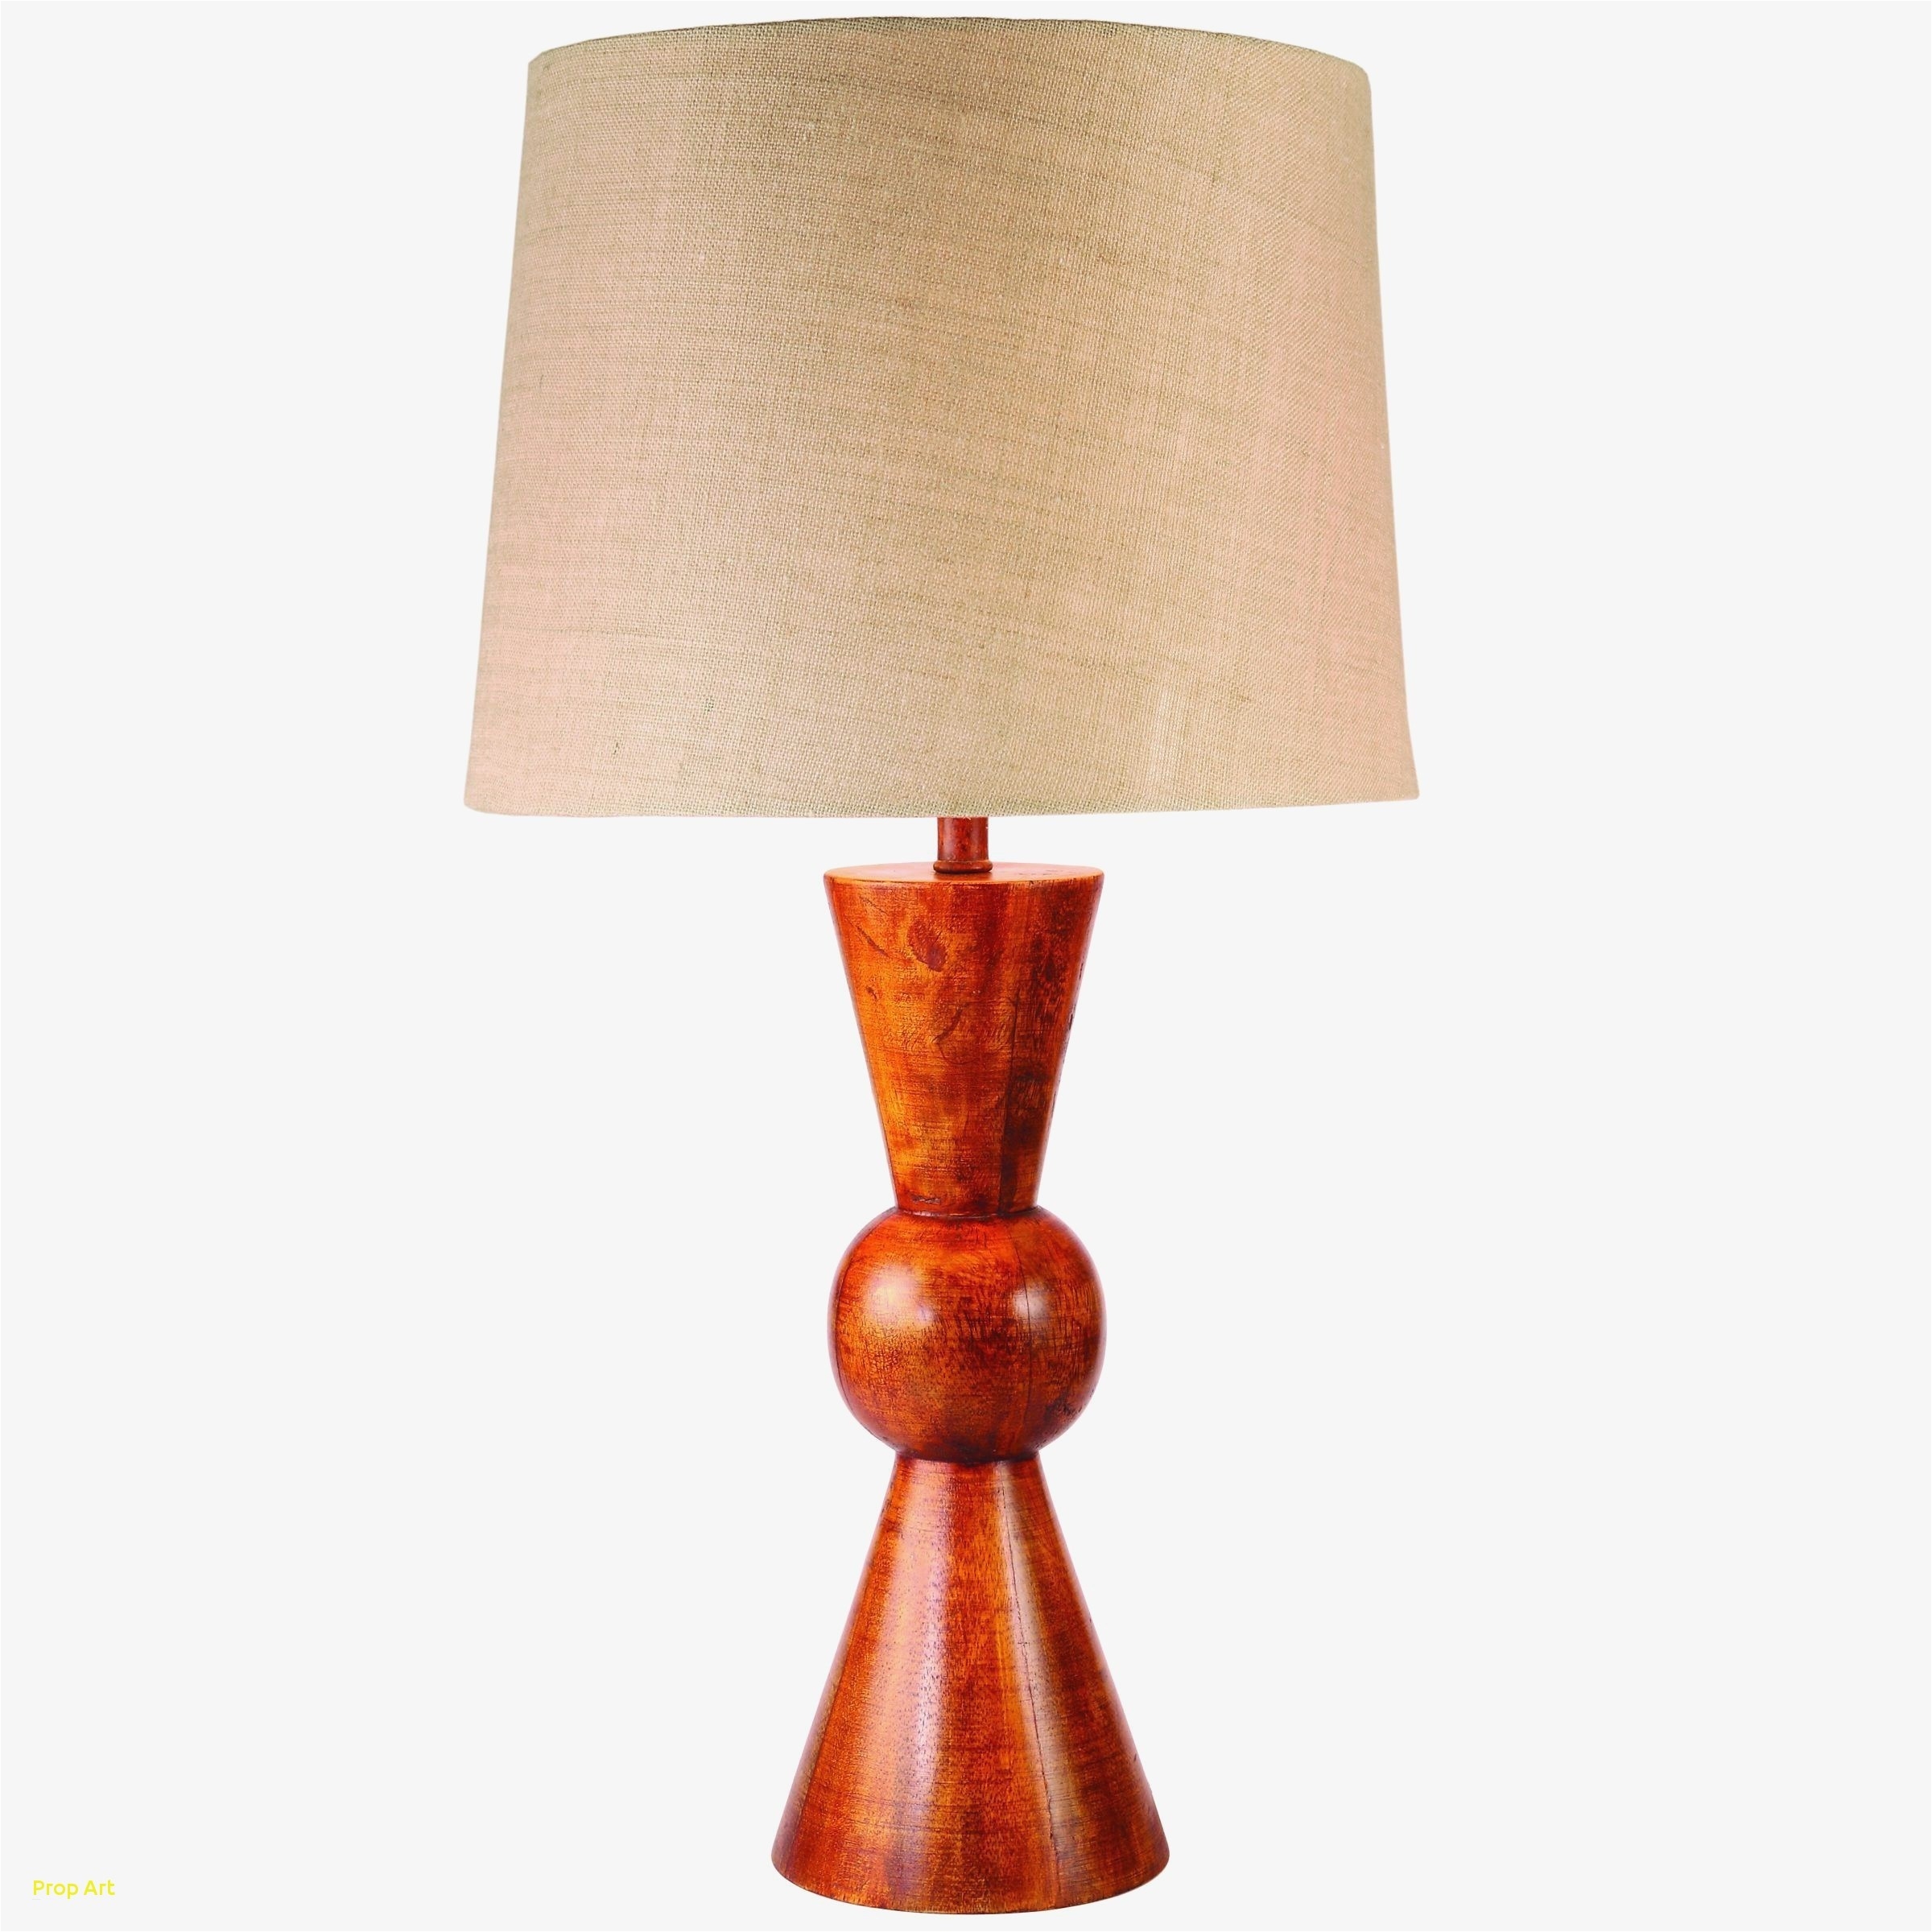 bedroom lamp shades fetching bedroom lamp shades within 10 luxury small lamp shades prop art